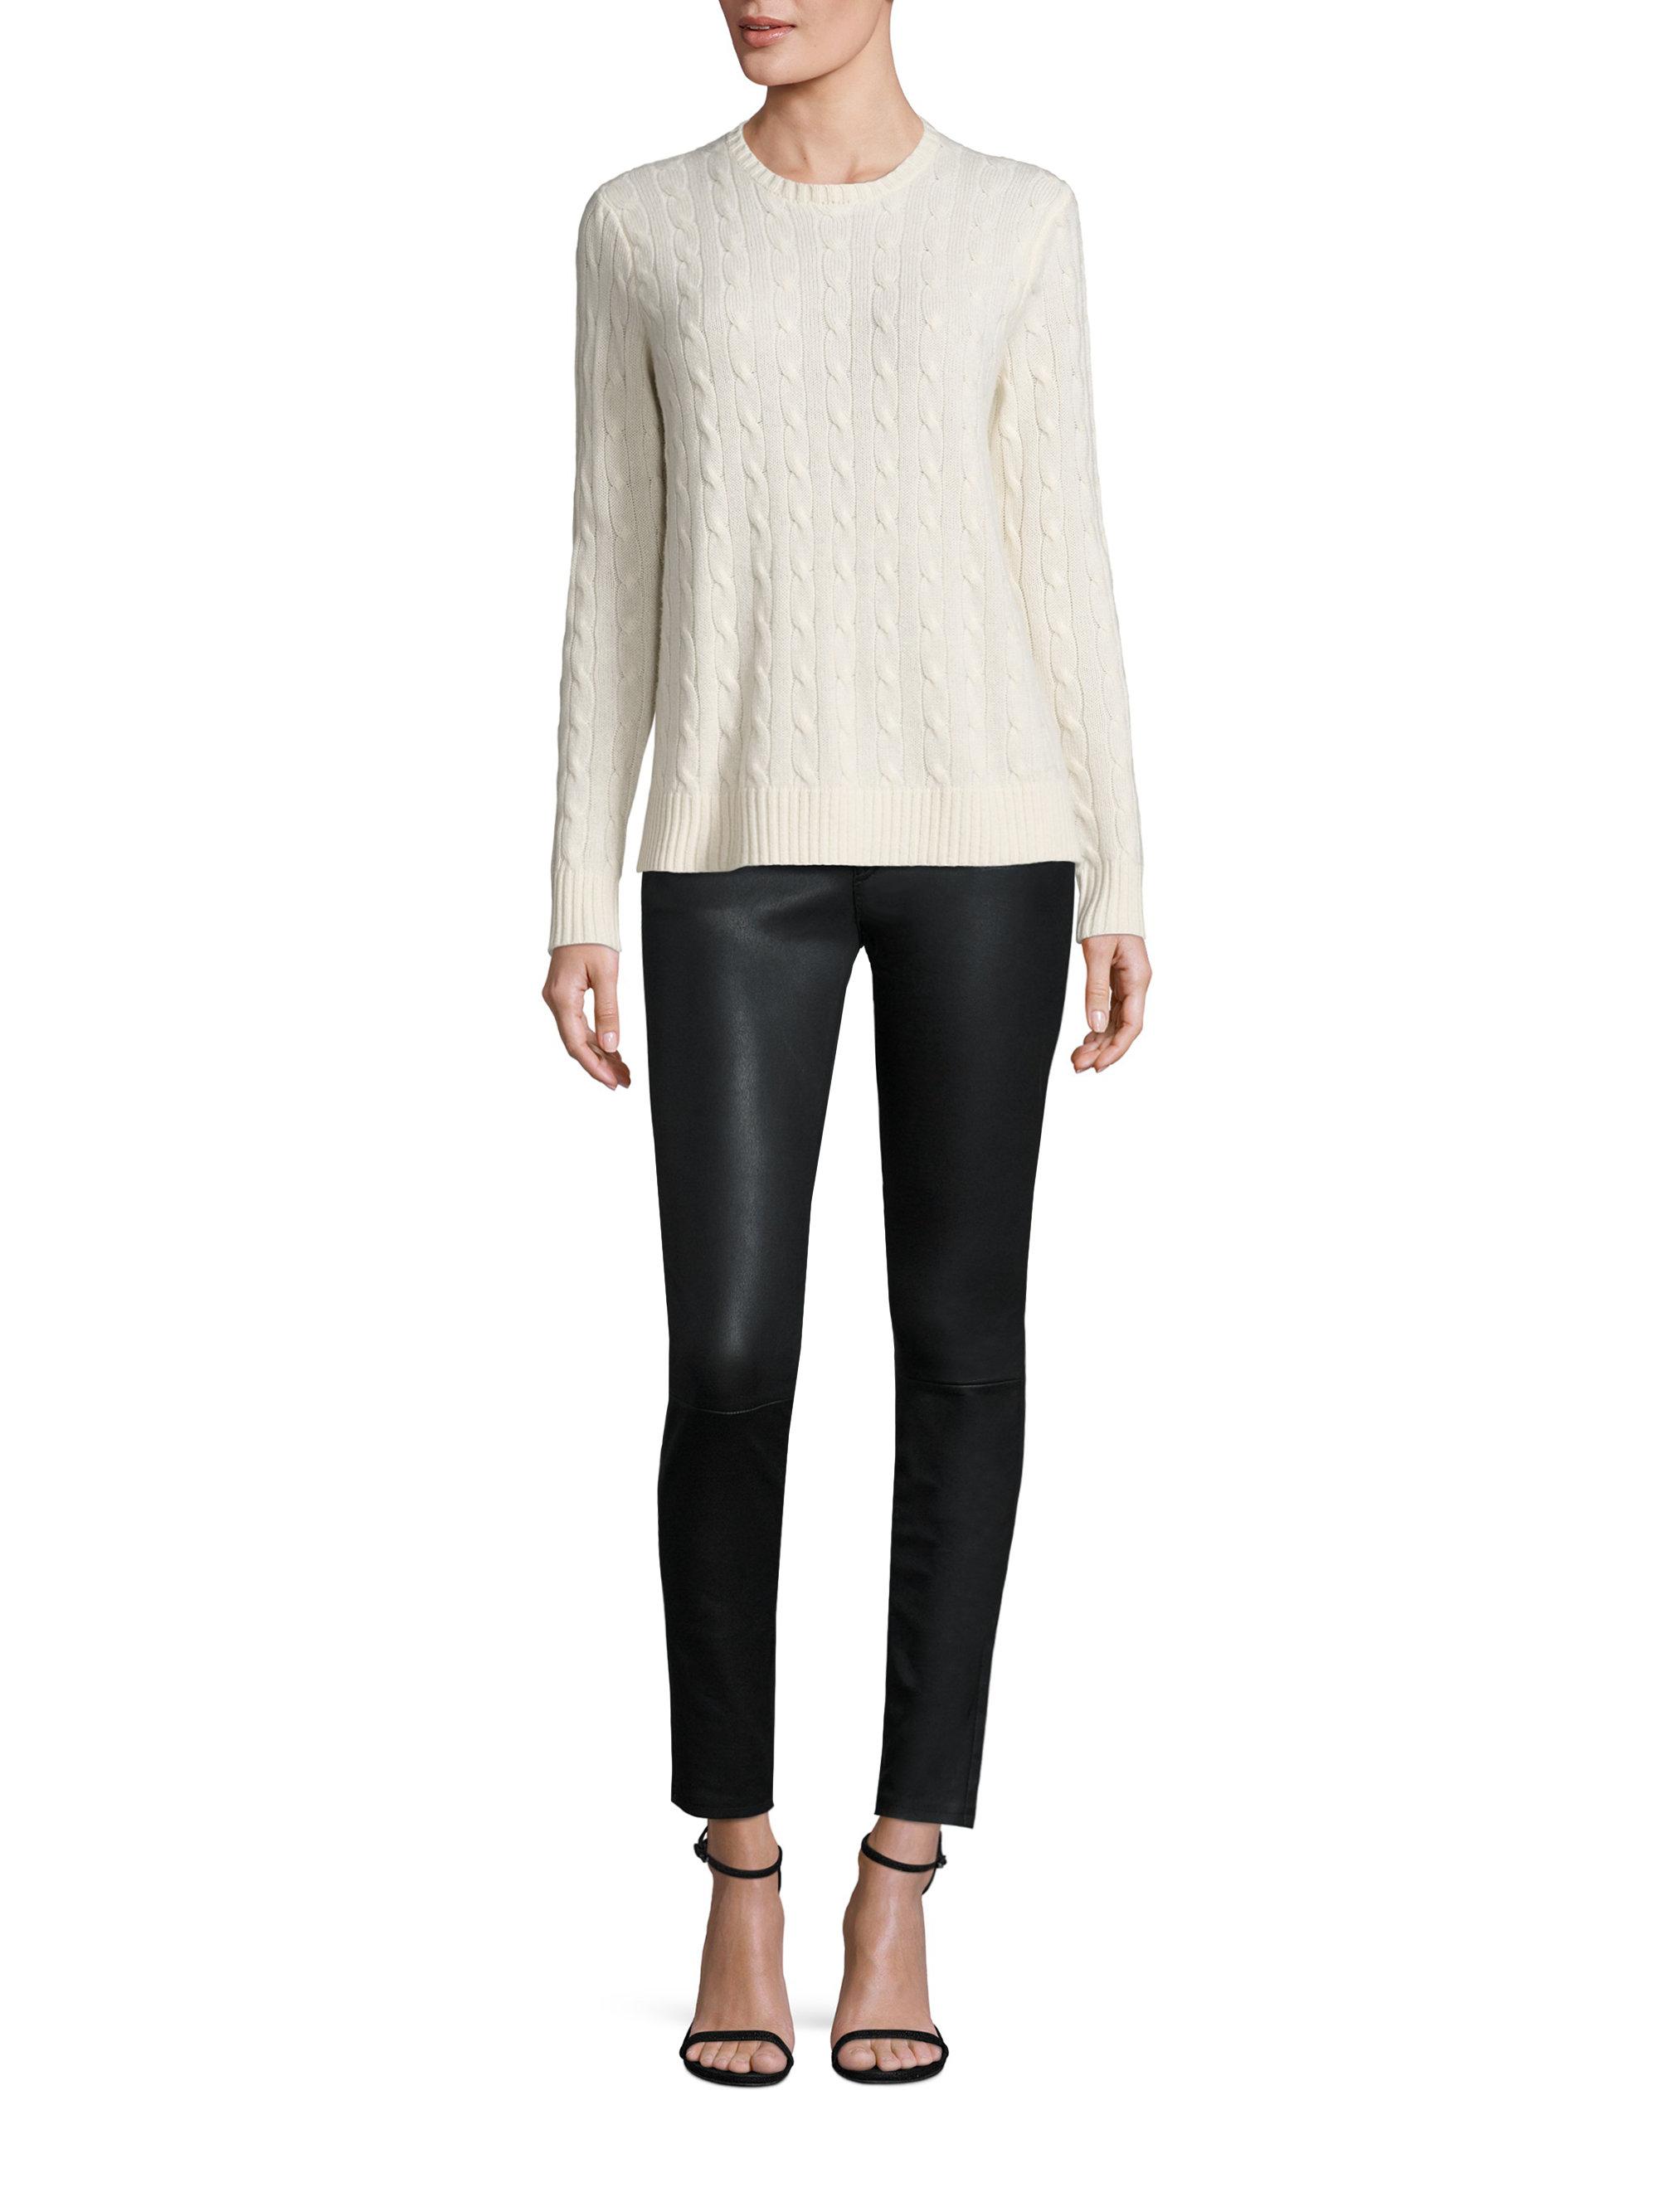 Lyst - Polo Ralph Lauren Cashmere Cable-knit Sweater in Black